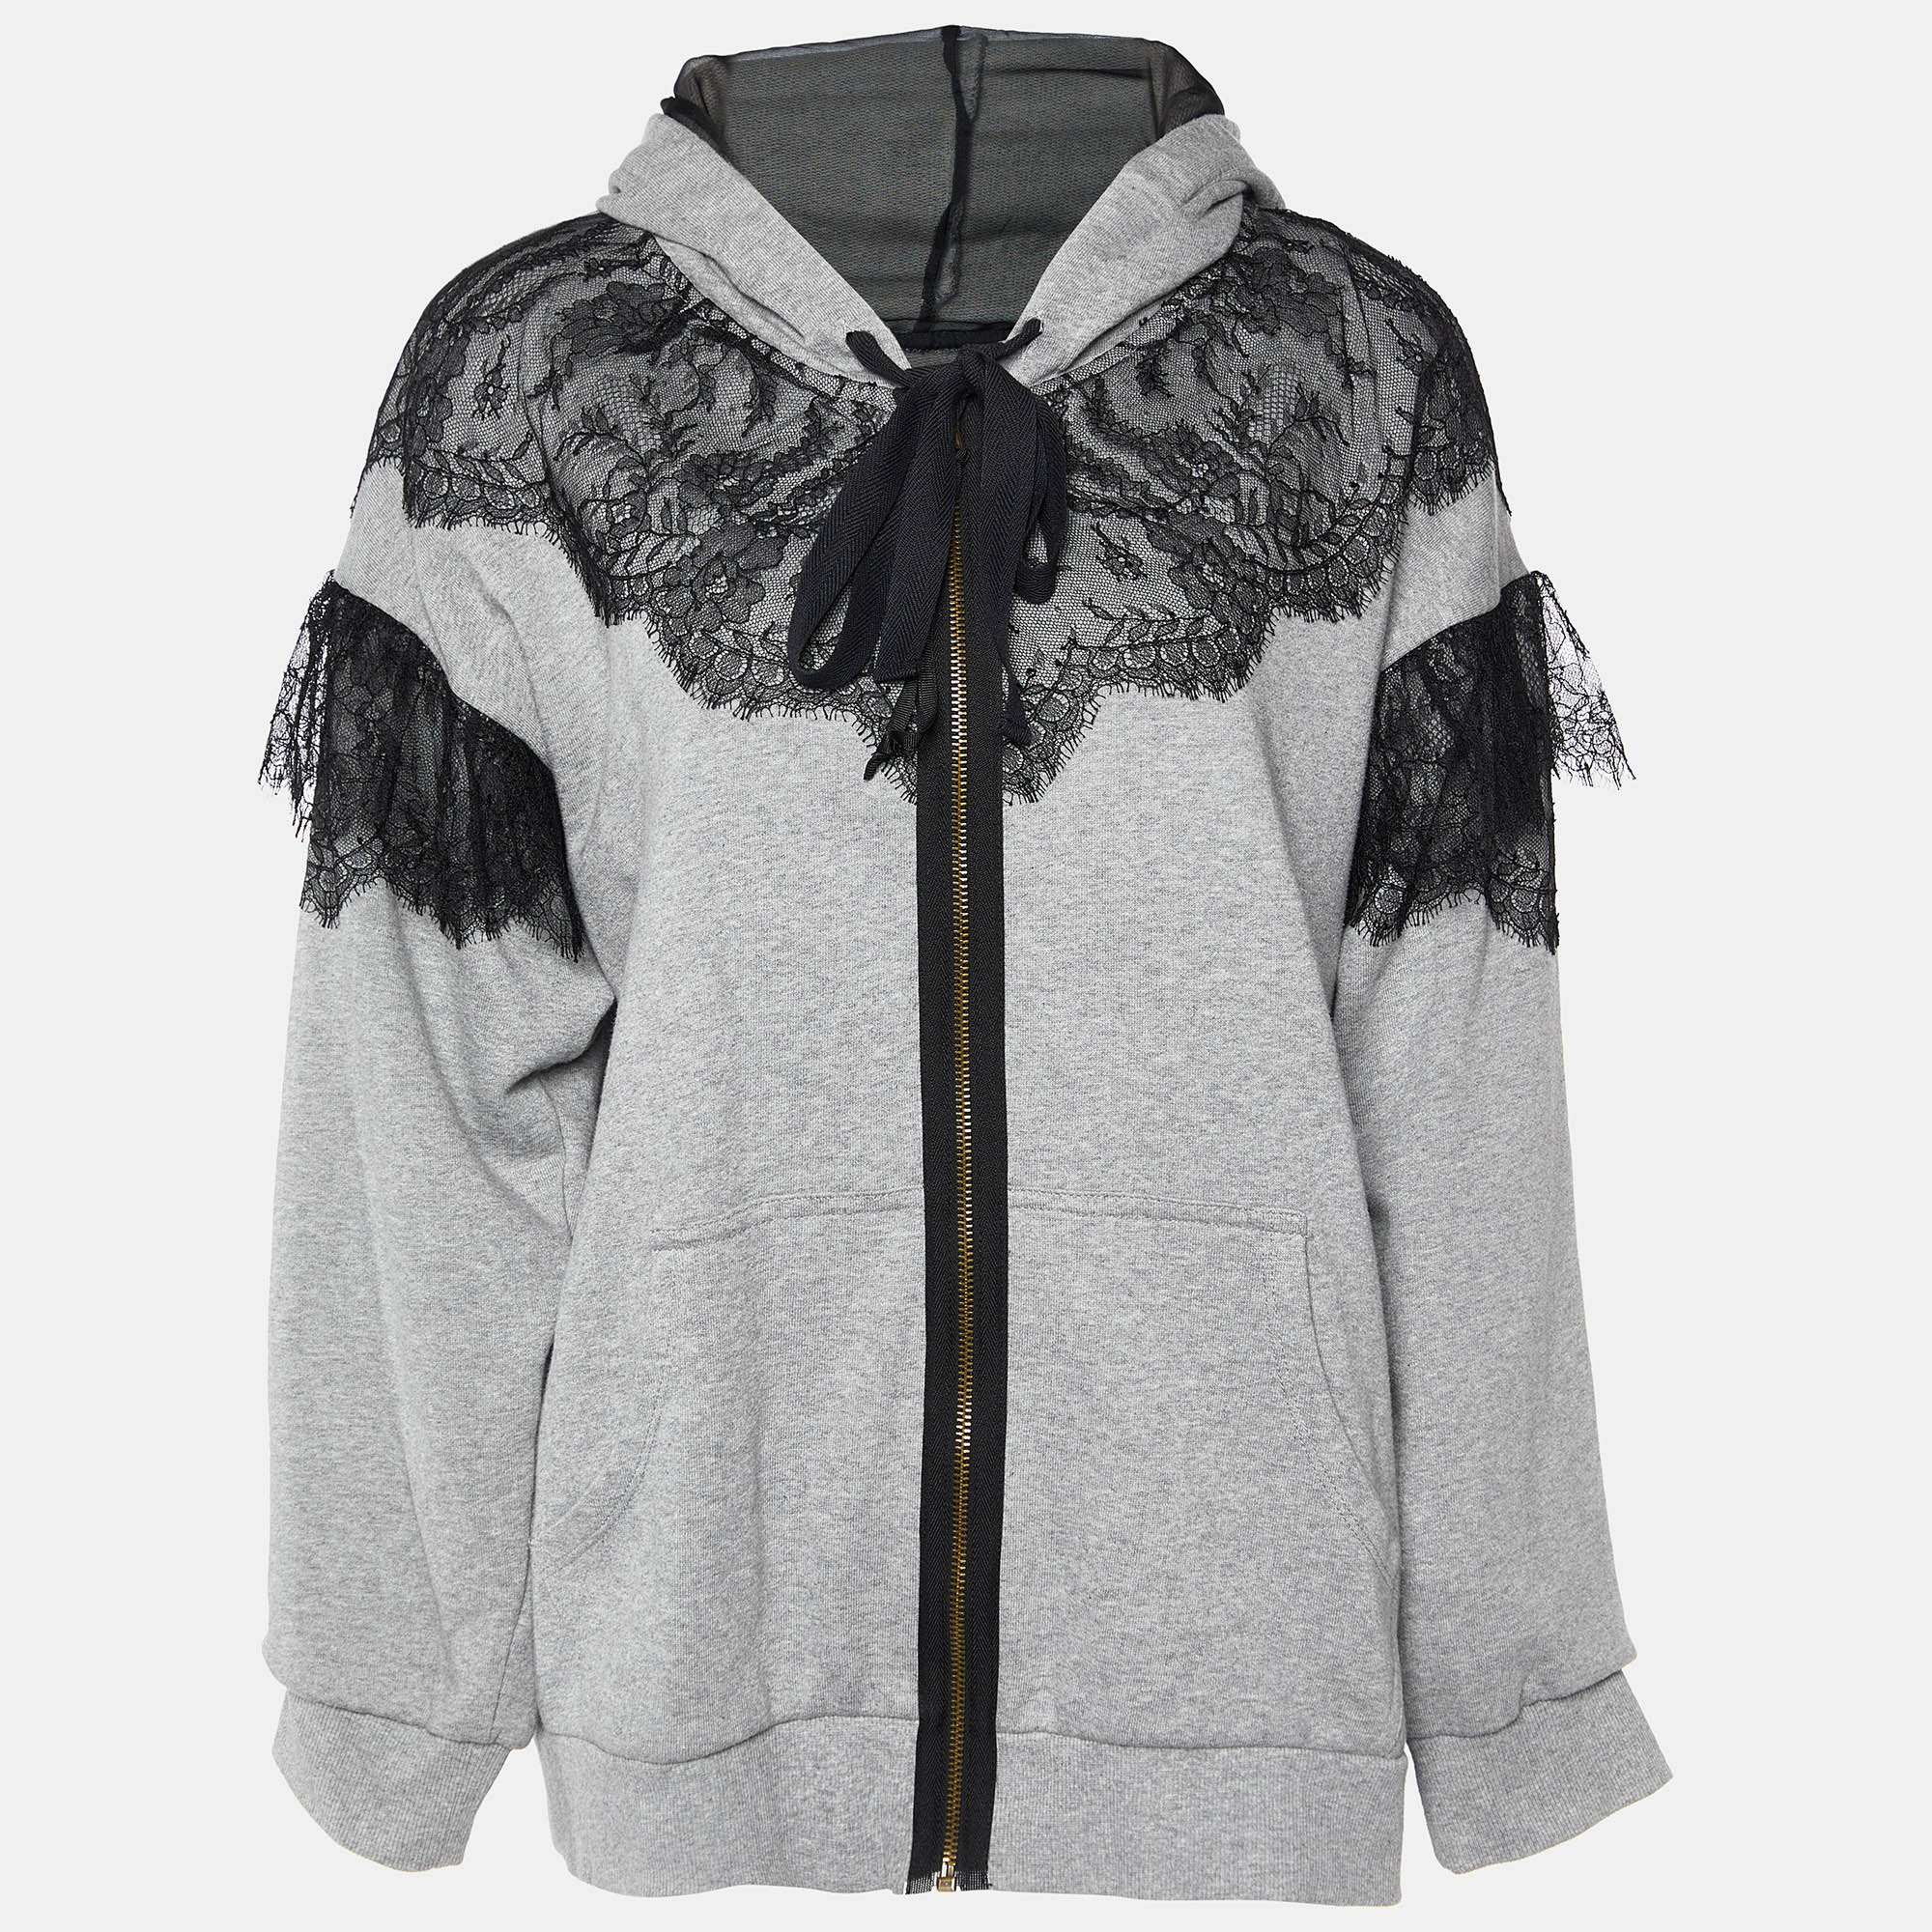 

RED Valentino Grey Cotton Lace Trim Hooded Zip Up Jacket